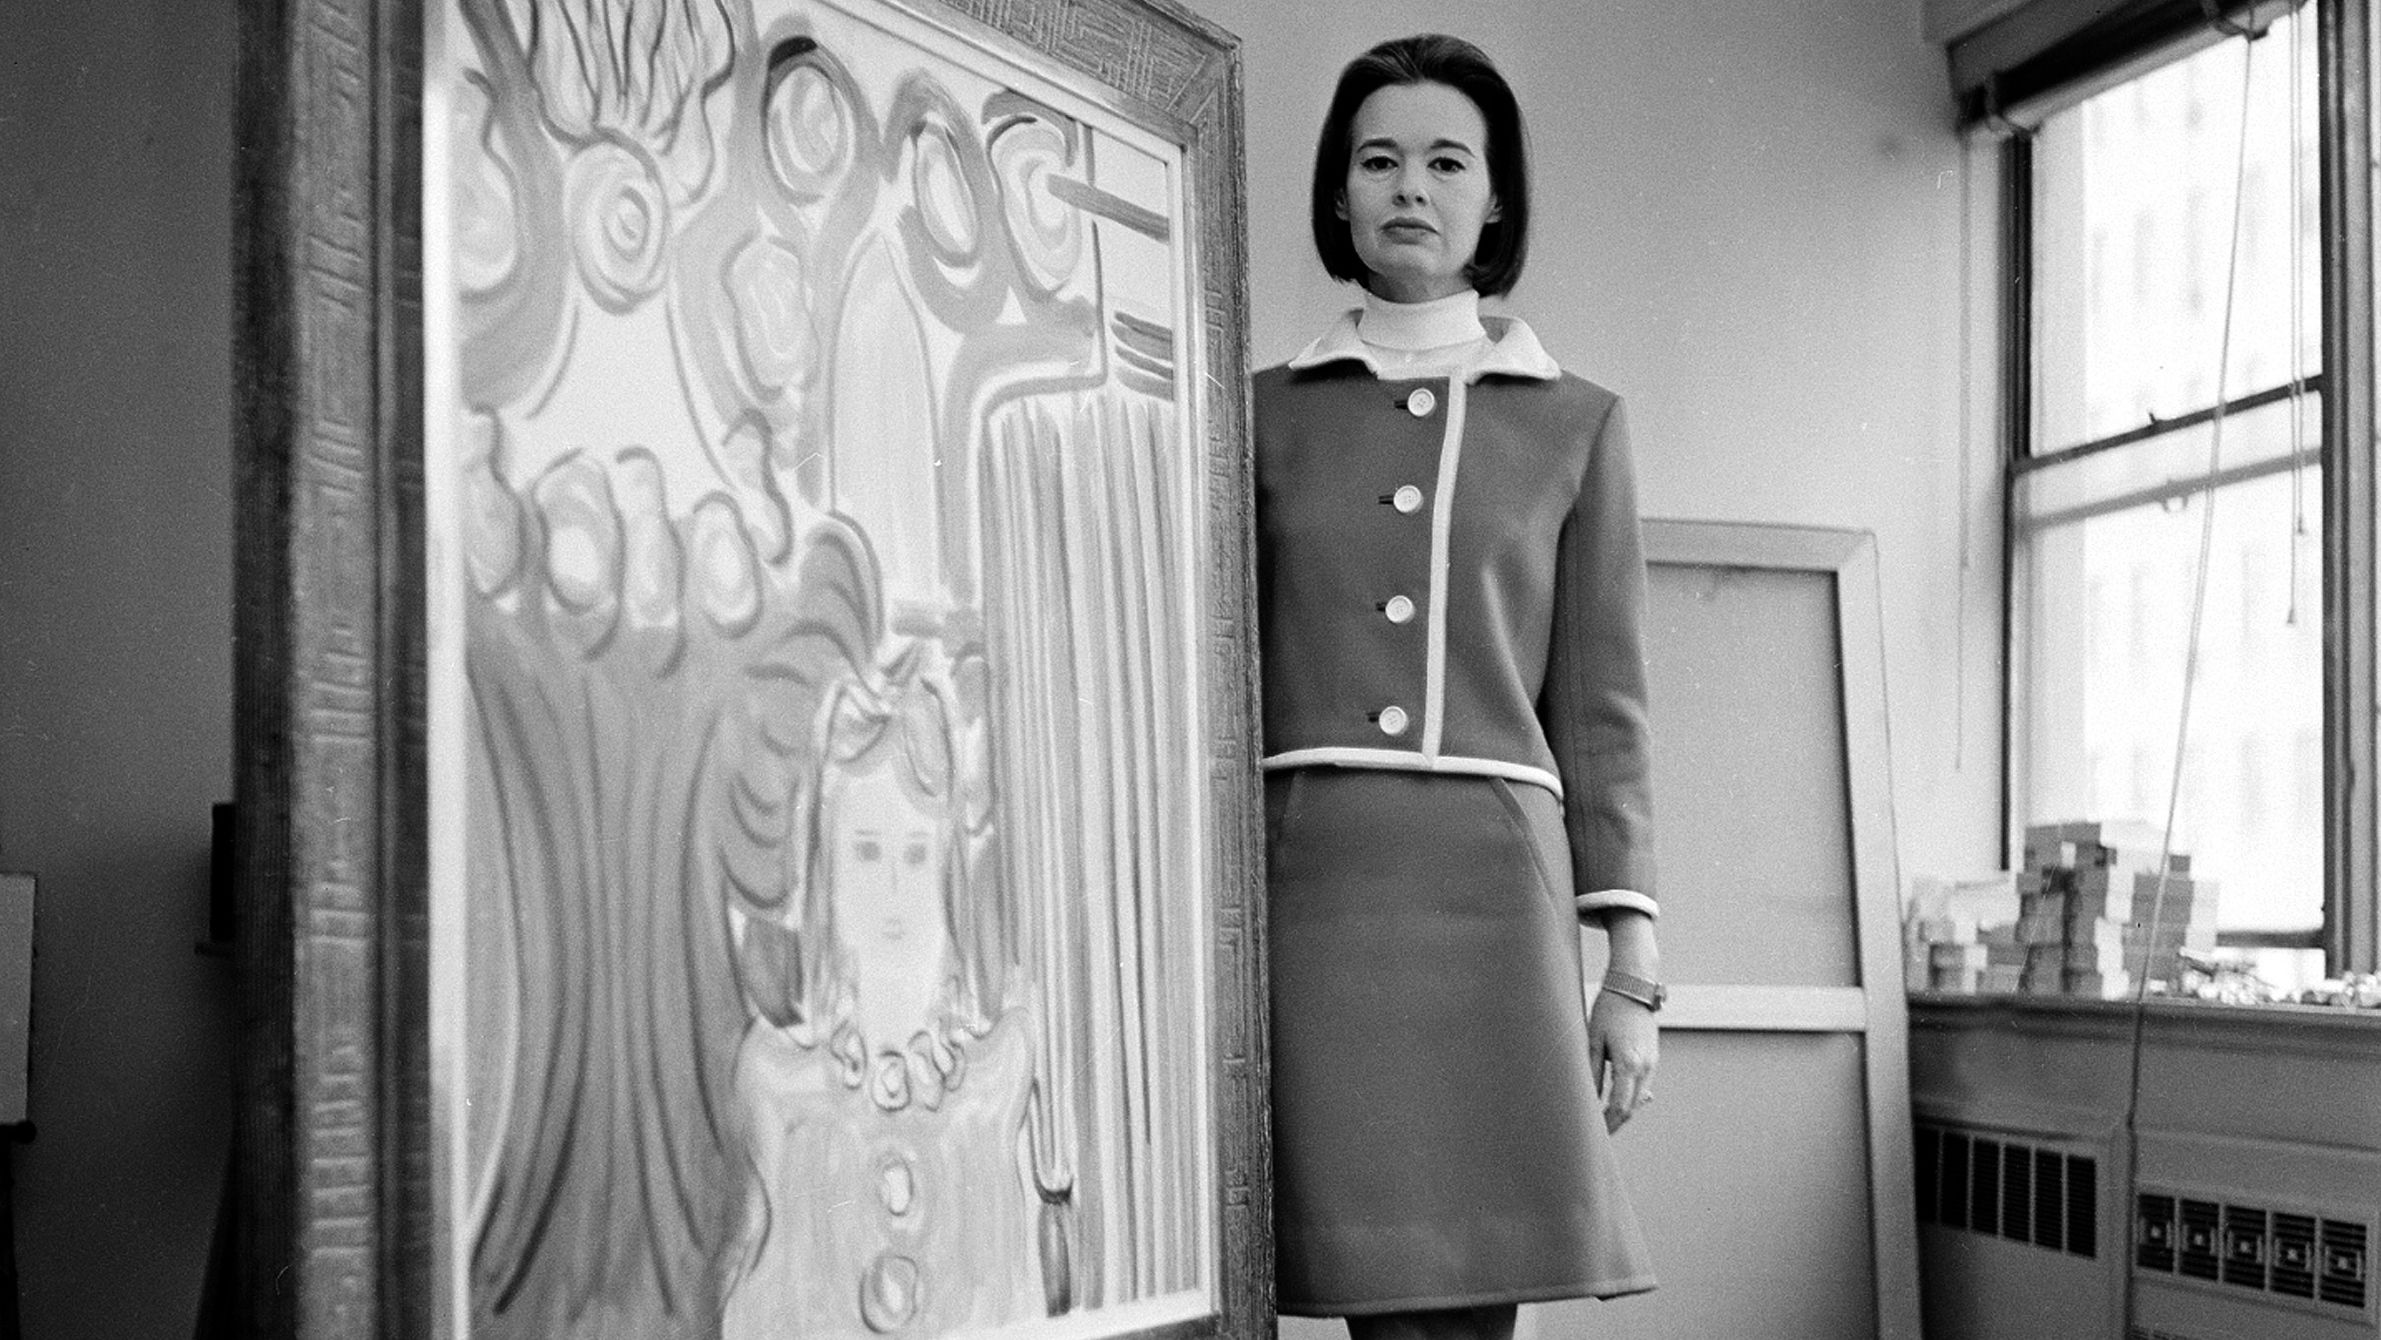 Vanderbilt poses with one of her paintings at her private studio in New York in 1966. She began exhibiting her artwork in the late 1940s.